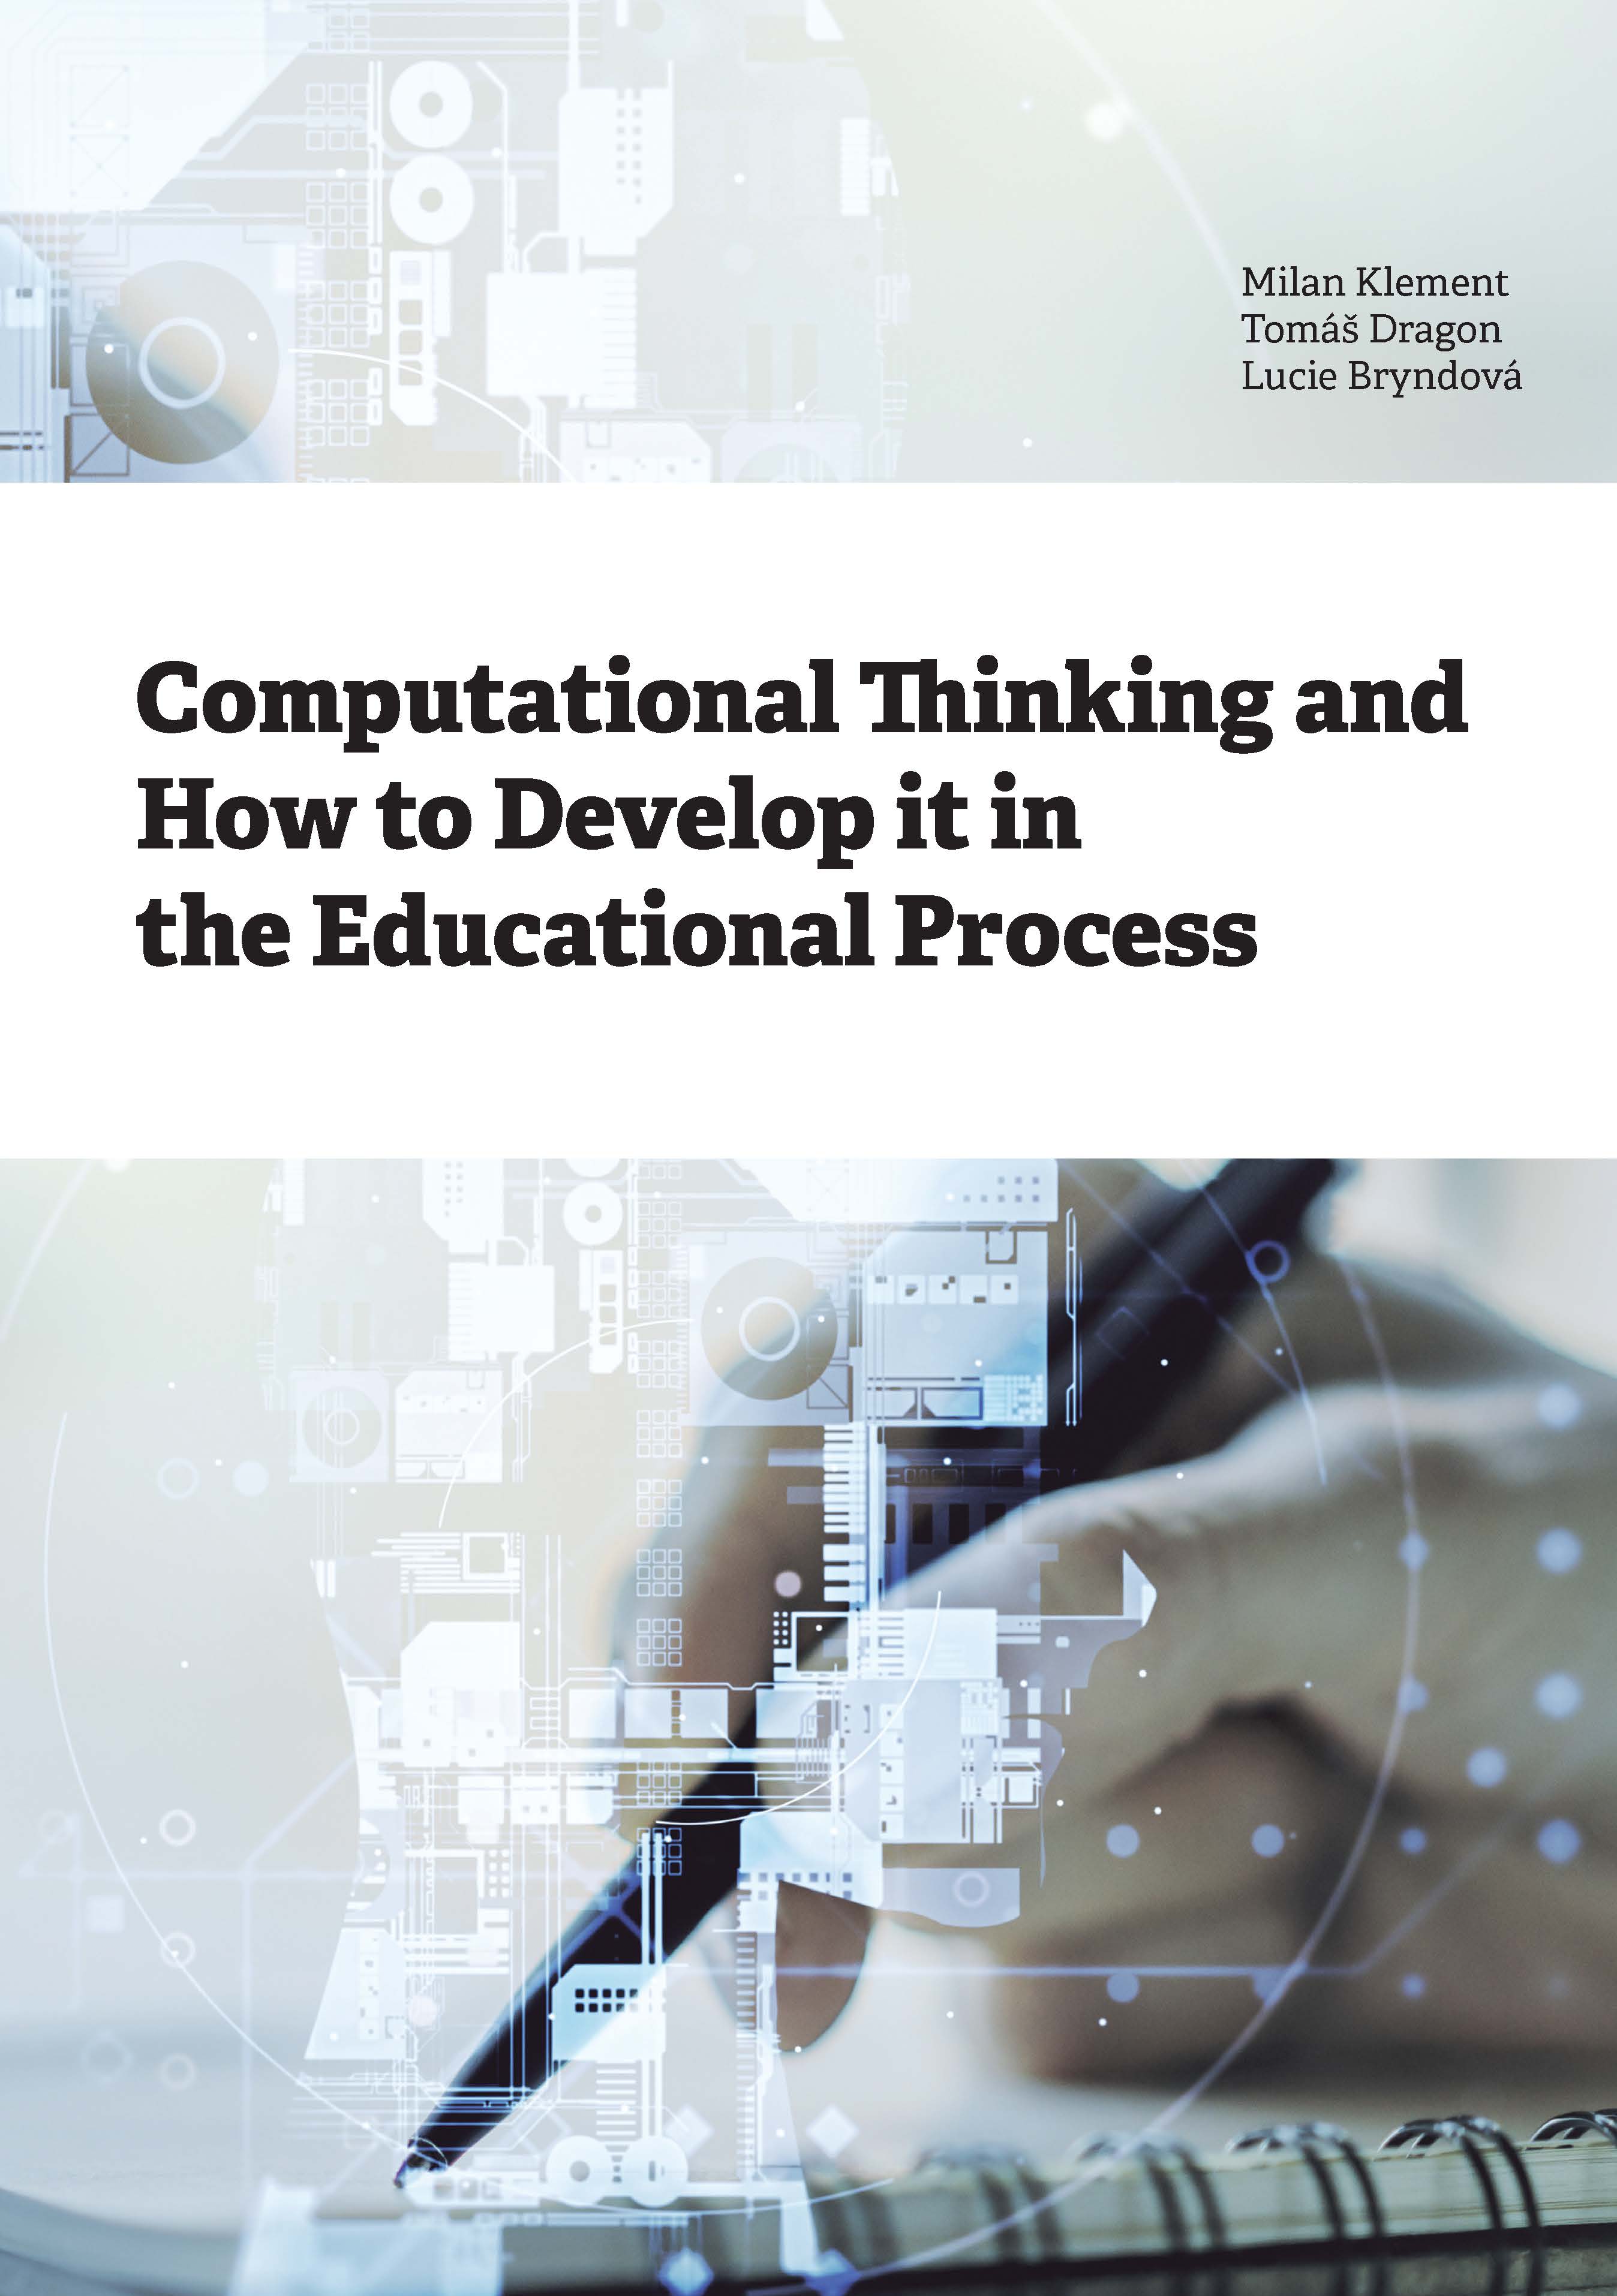 Computational Thinking and How to Develop It in the Educational Process